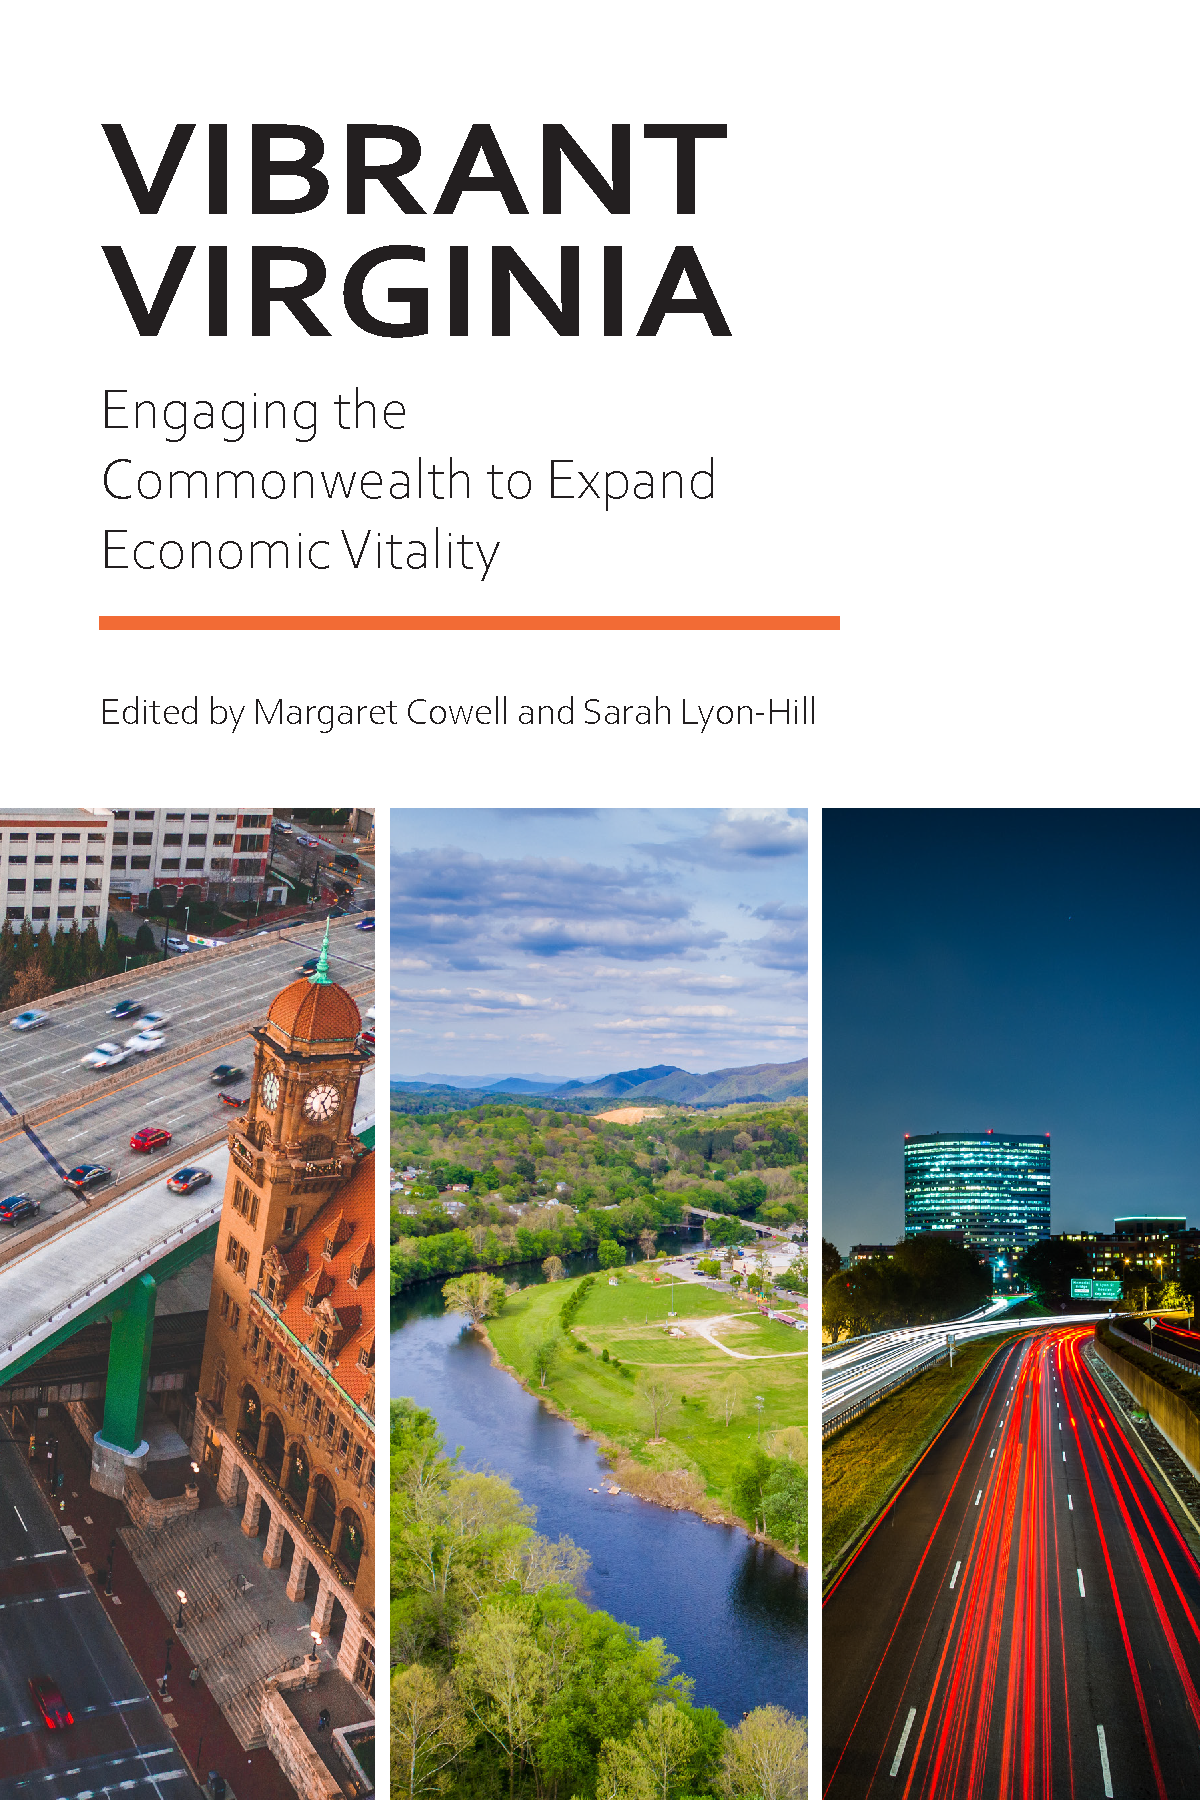 The book cover for Vibrant Virginia: Engaging the Commonwealth to Expand Economic Vitality, edited by Margaret Cowell and Sarah Lyon-Hill, shows three images: two of Virginia cities and one Virginia landscape.